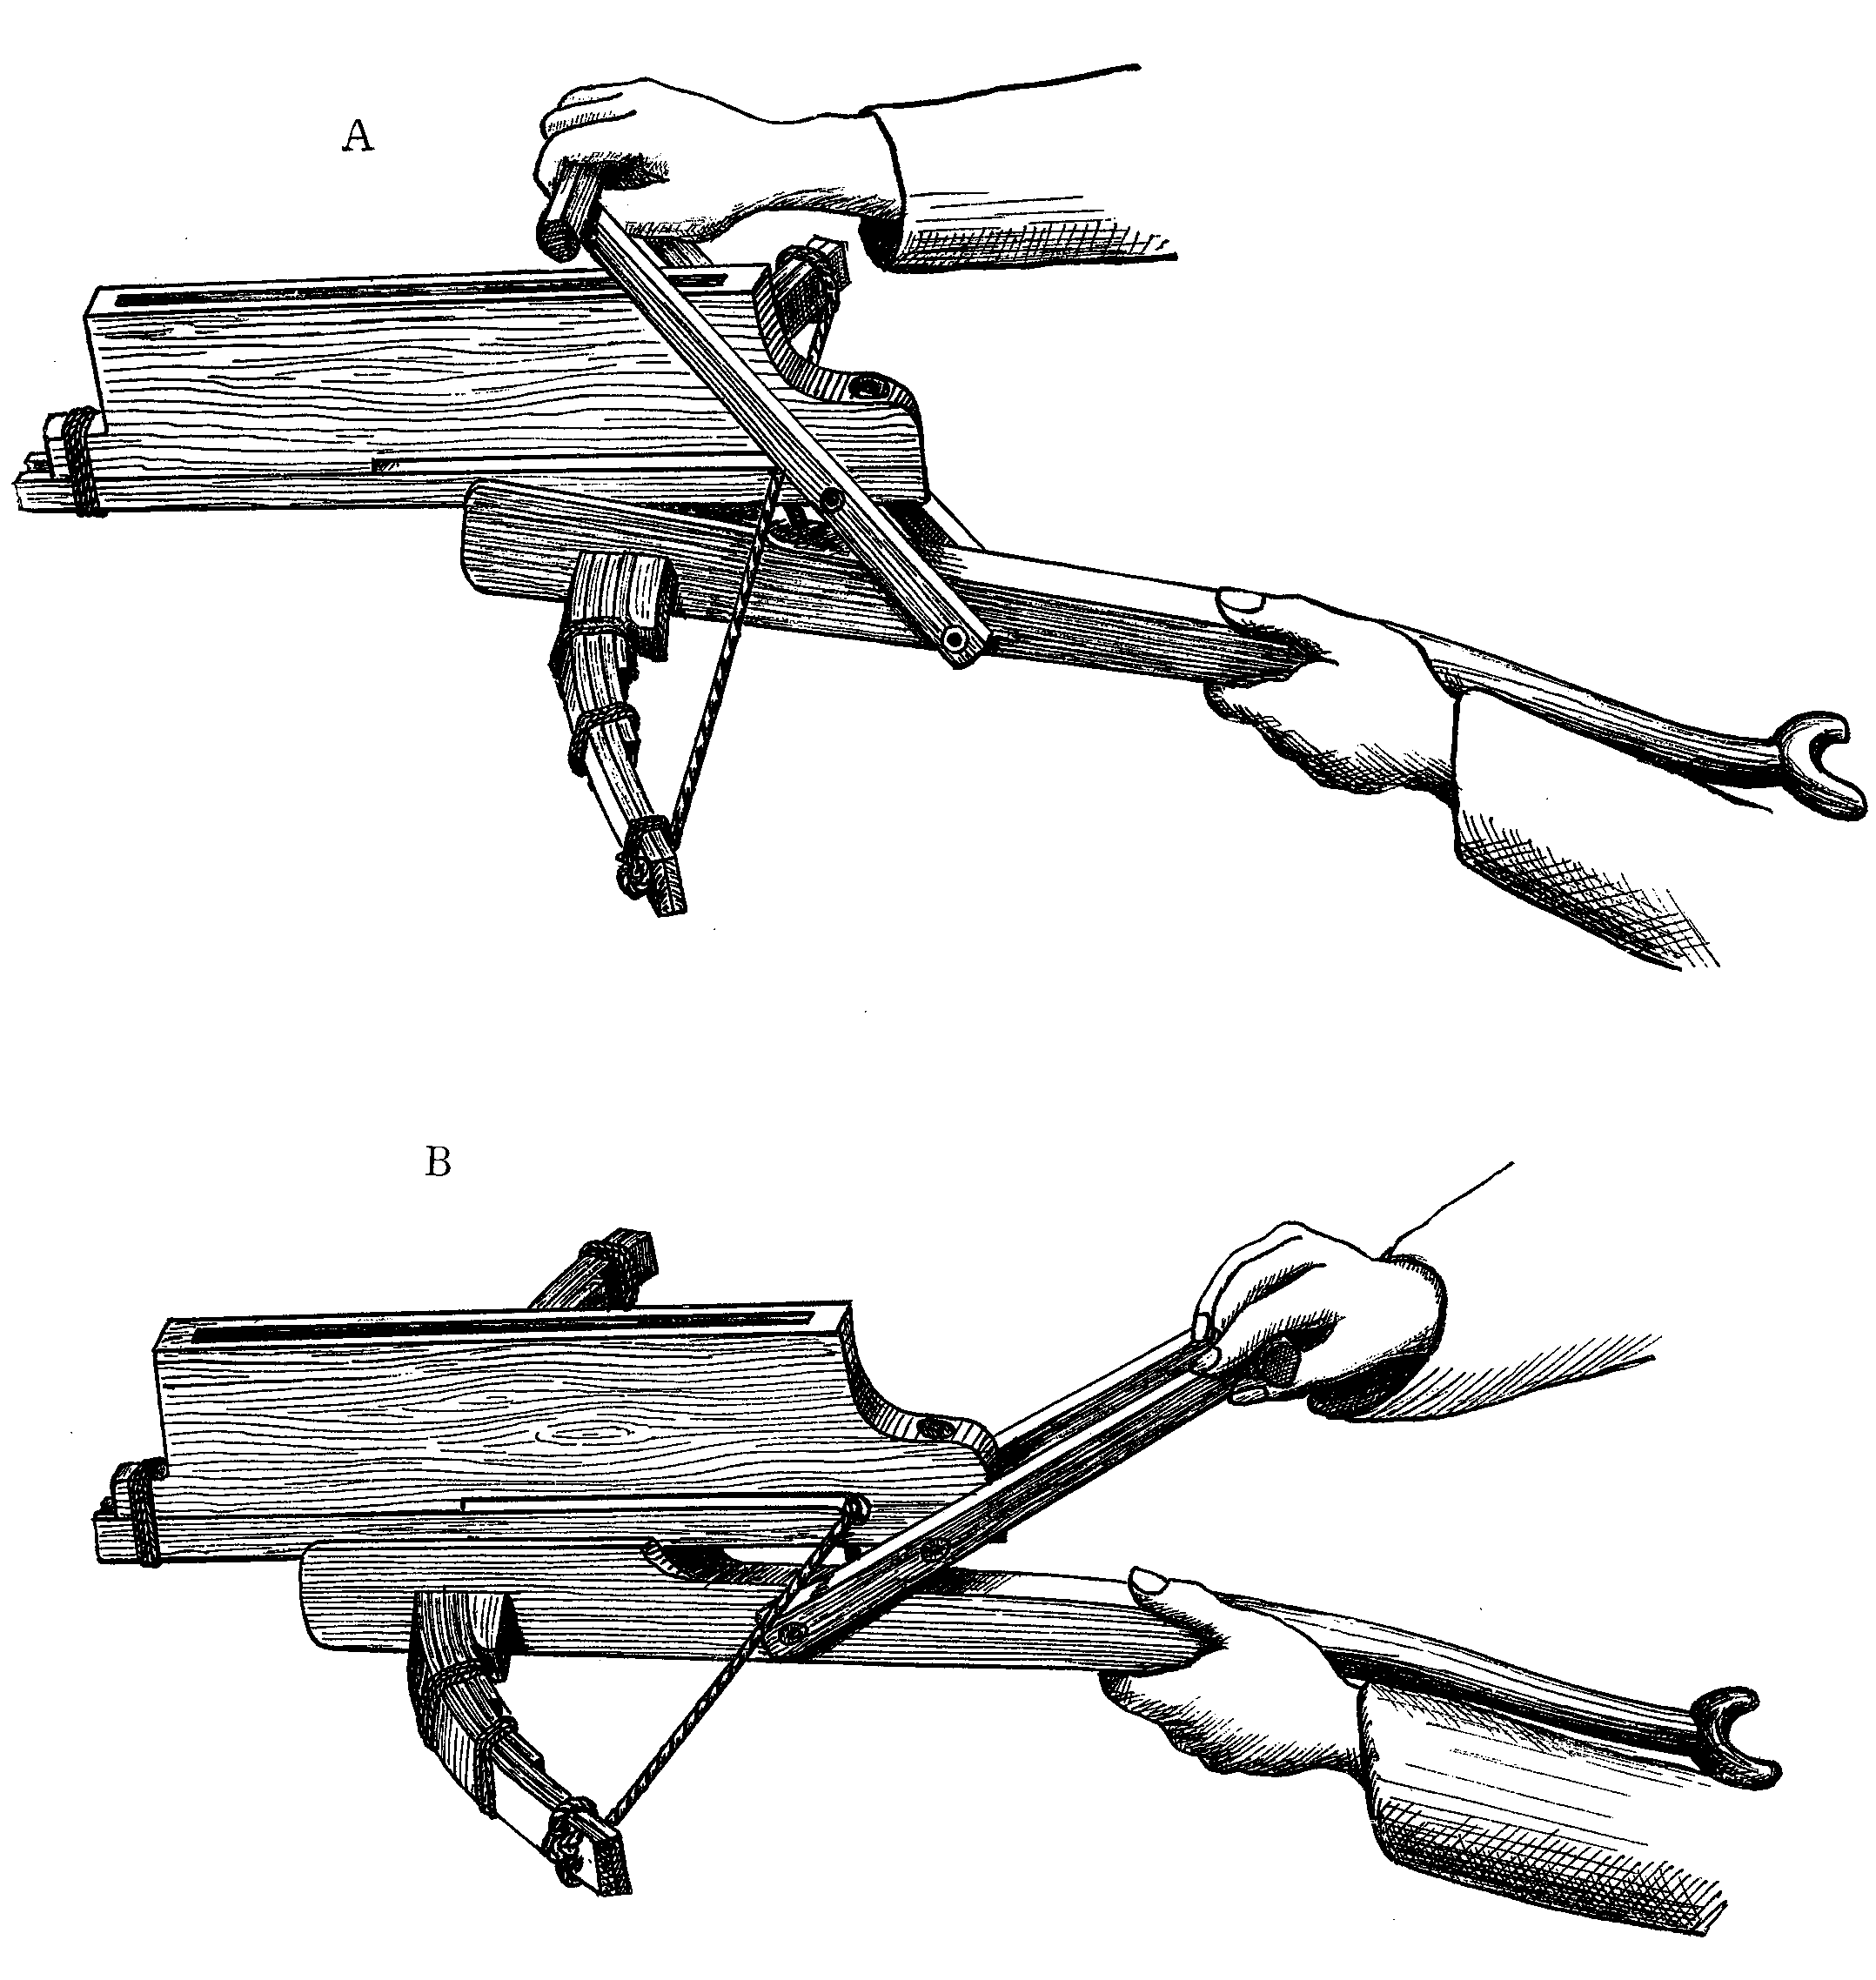 repeating crossbow design